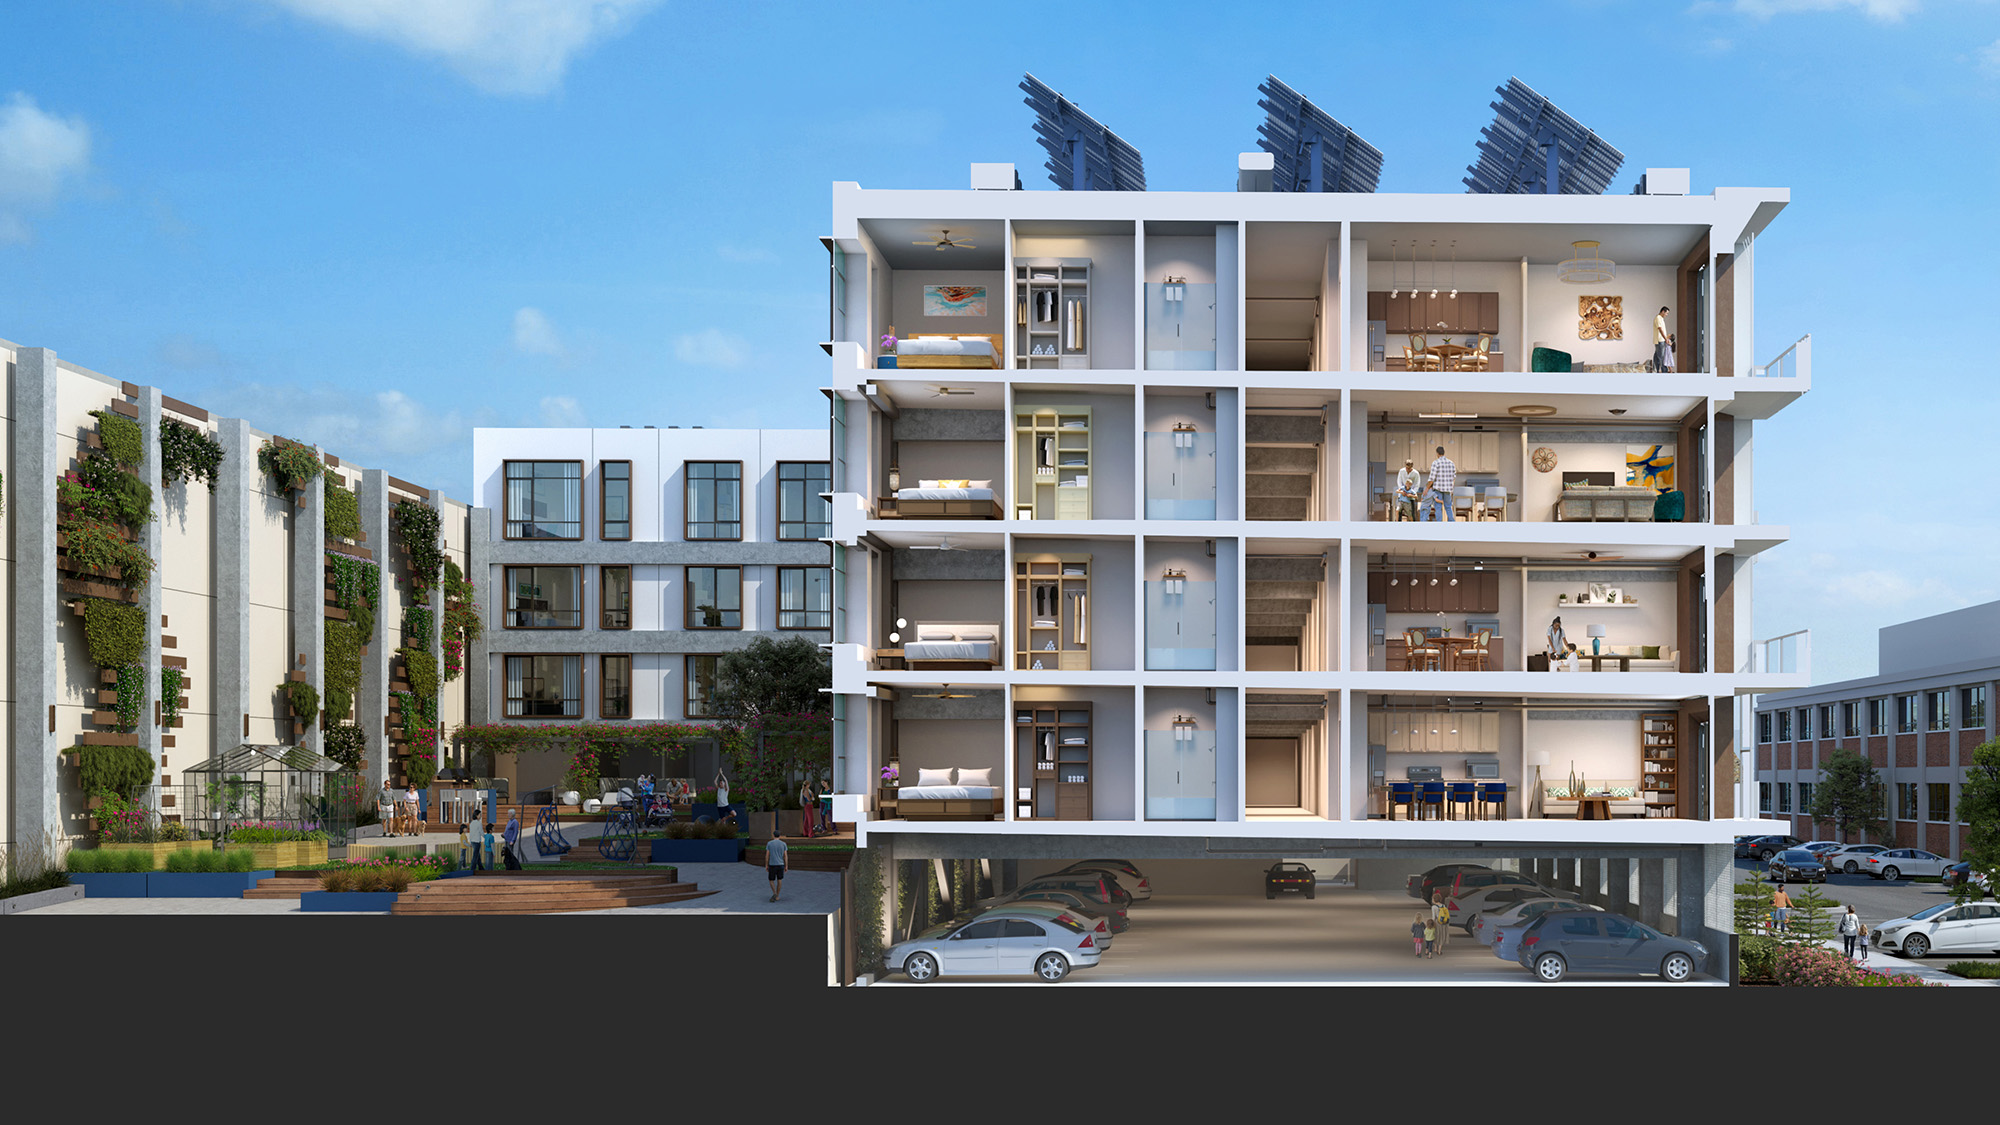 Modular adaptive reuse housing project cross section rendering